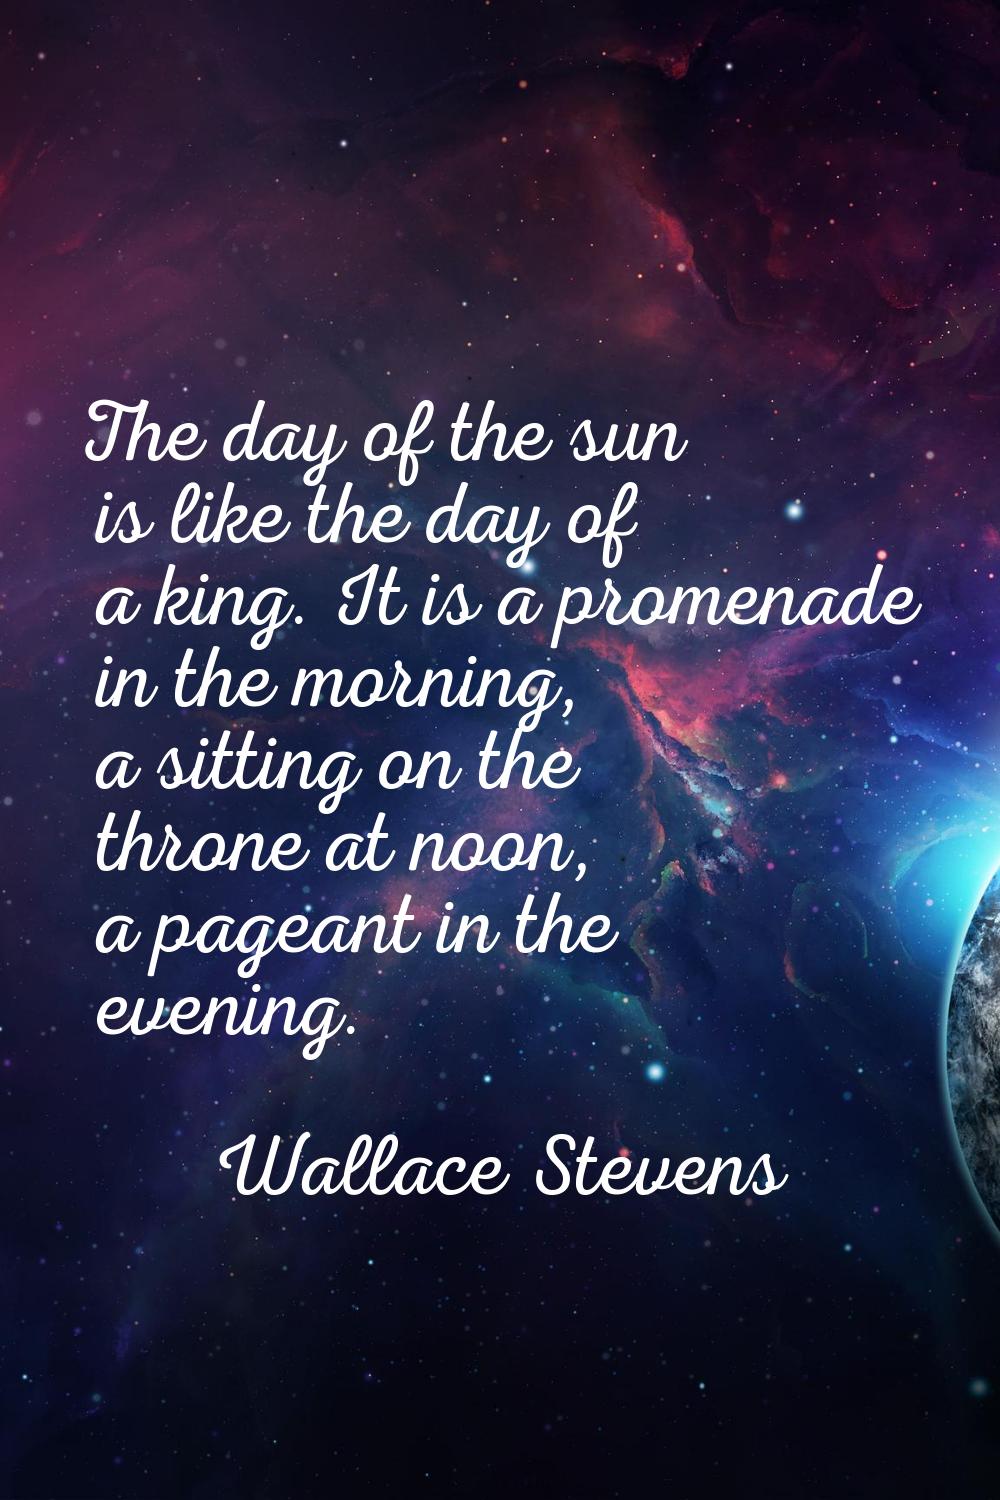 The day of the sun is like the day of a king. It is a promenade in the morning, a sitting on the th